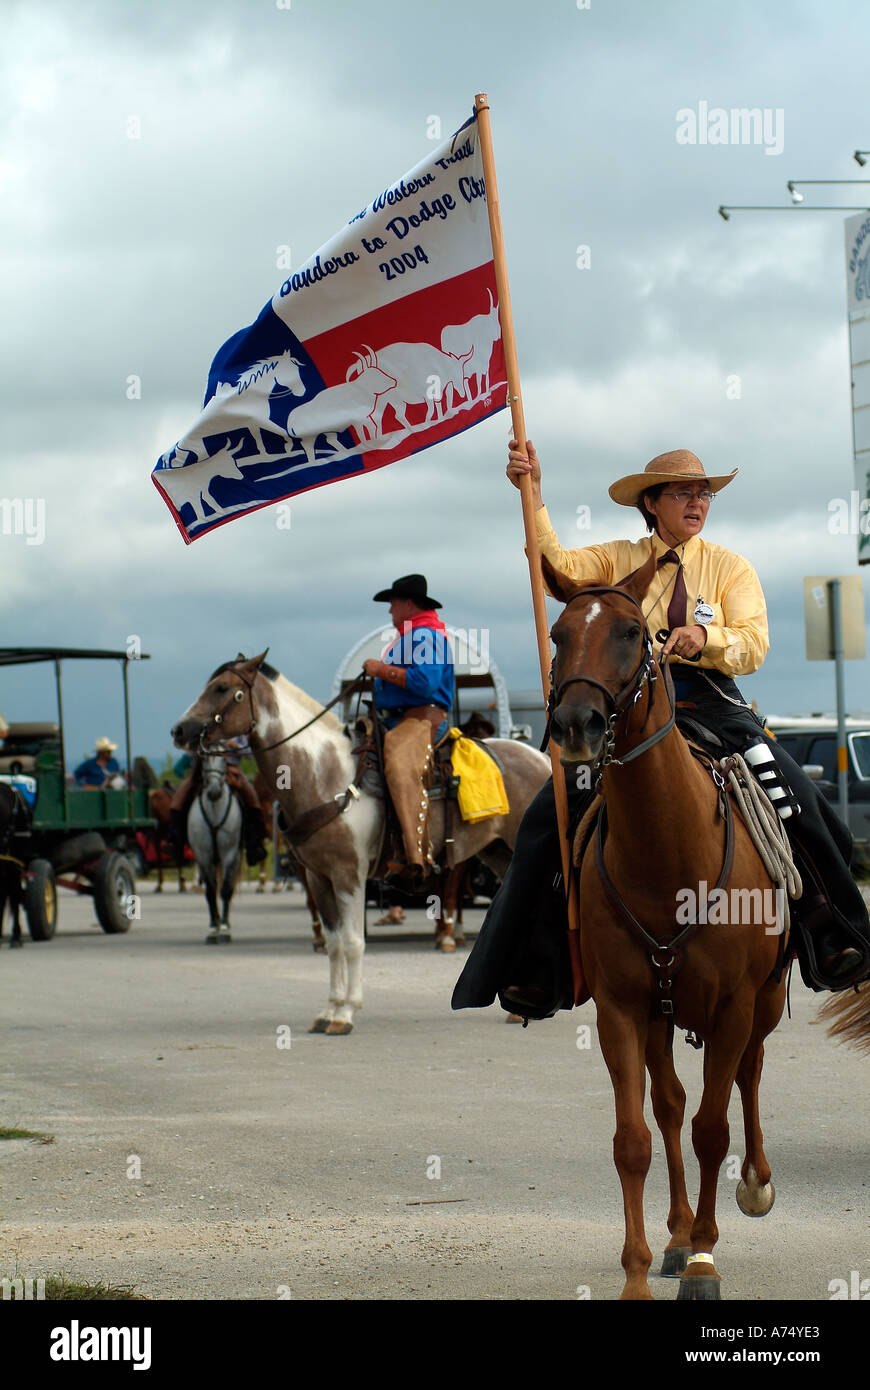 Woman with a flag riding a horse in Bandera Texas Stock Photo